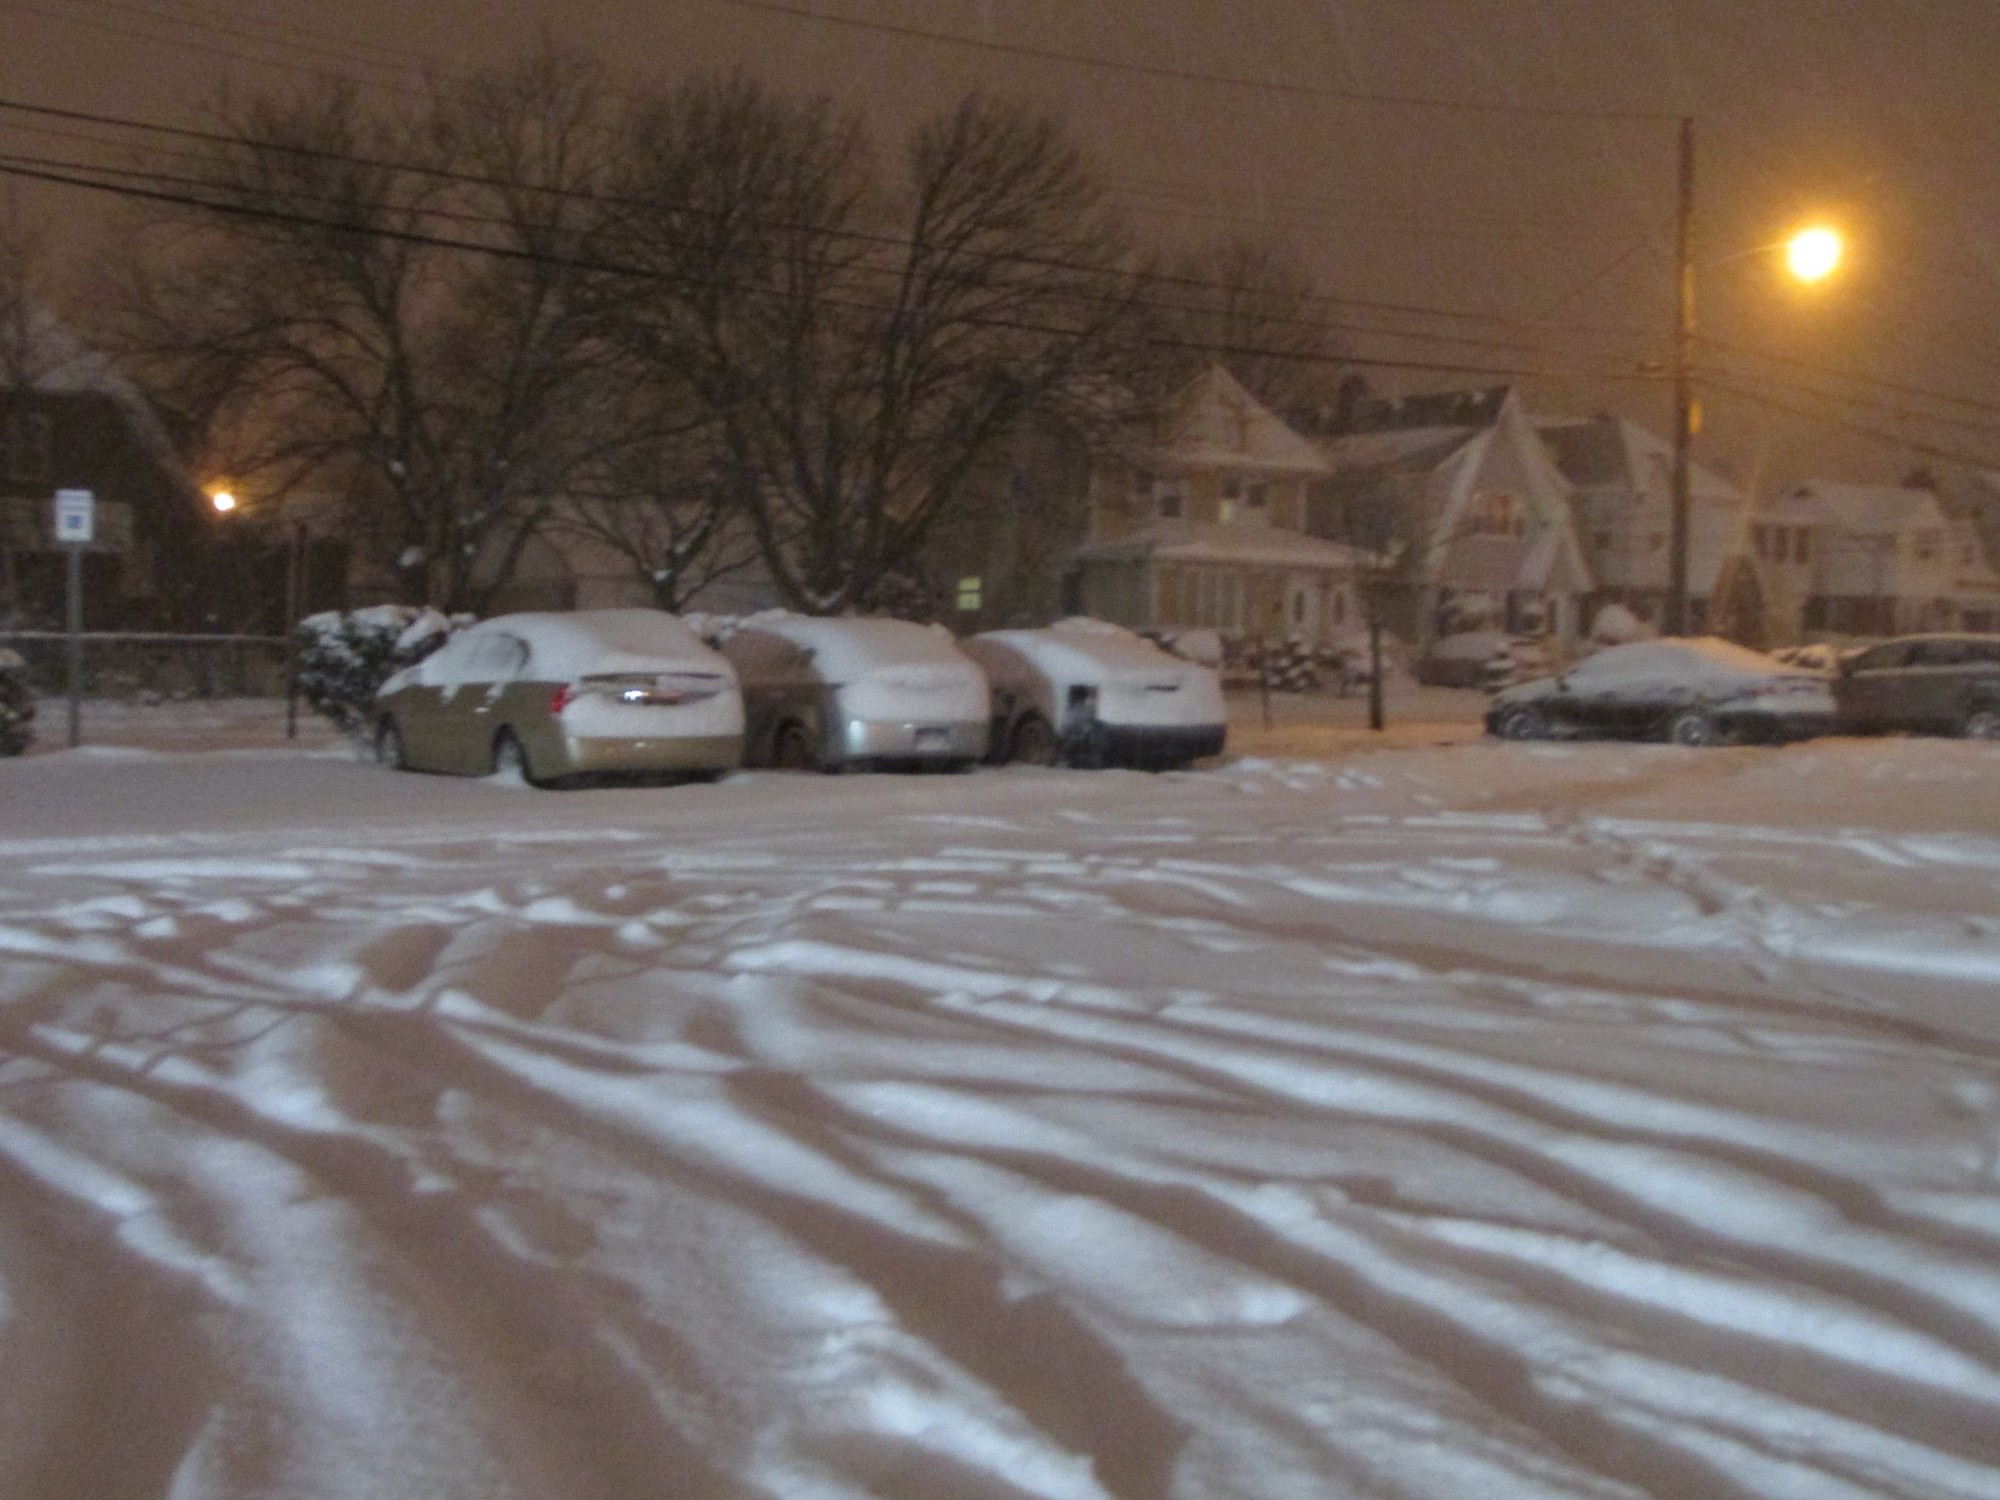 Several cars were snowed in at a municipal lot in Valley Stream.